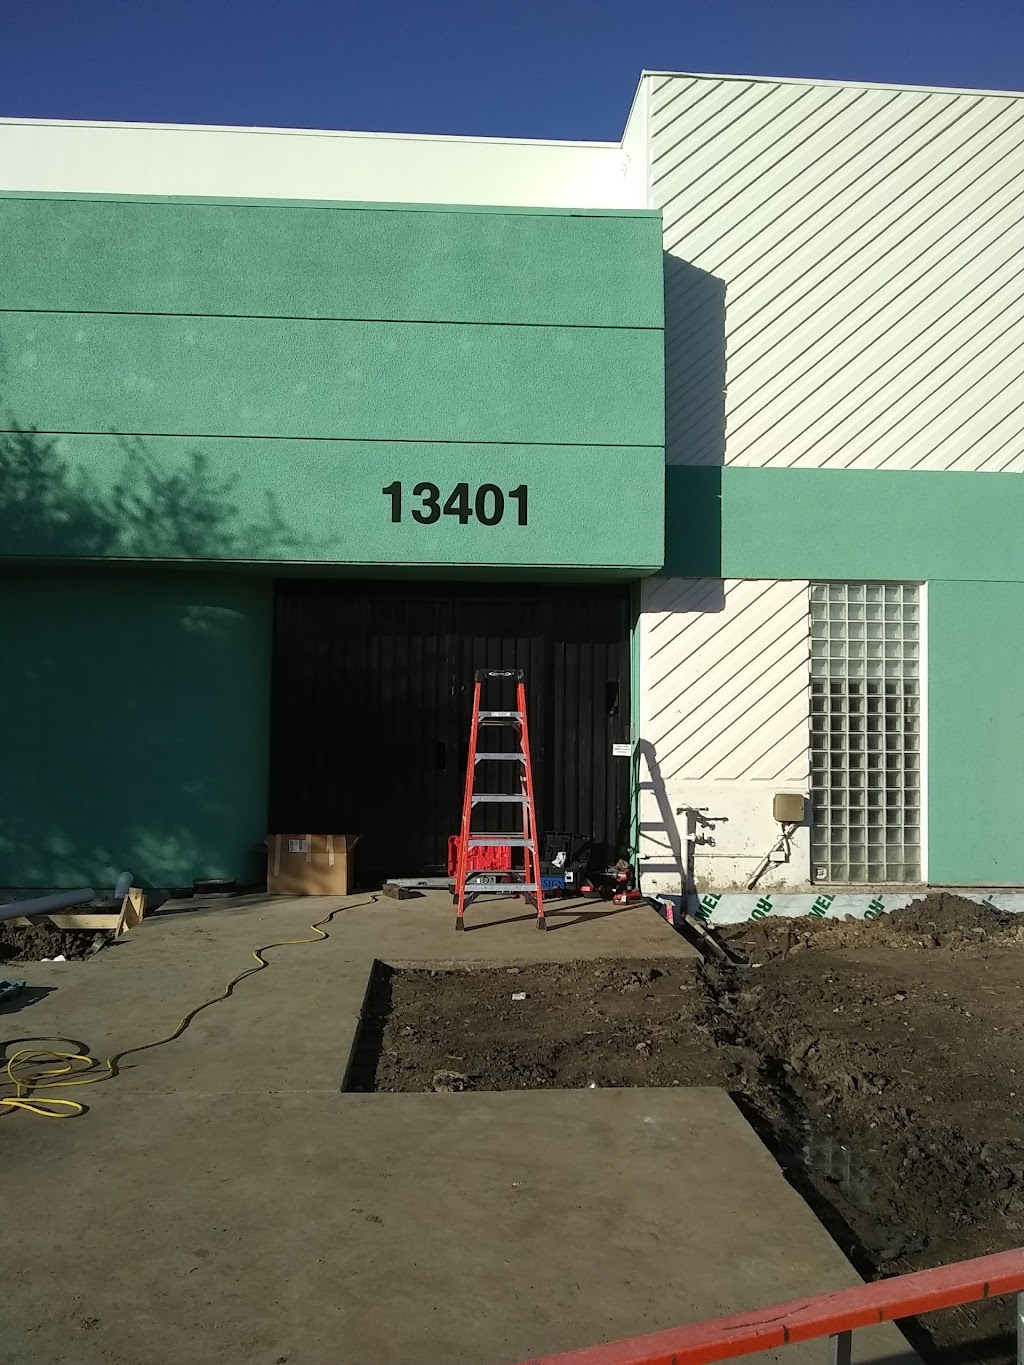 123 Moving and Storage | 13401 S Main St, Los Angeles, CA 90061, USA | Phone: (310) 618-8120